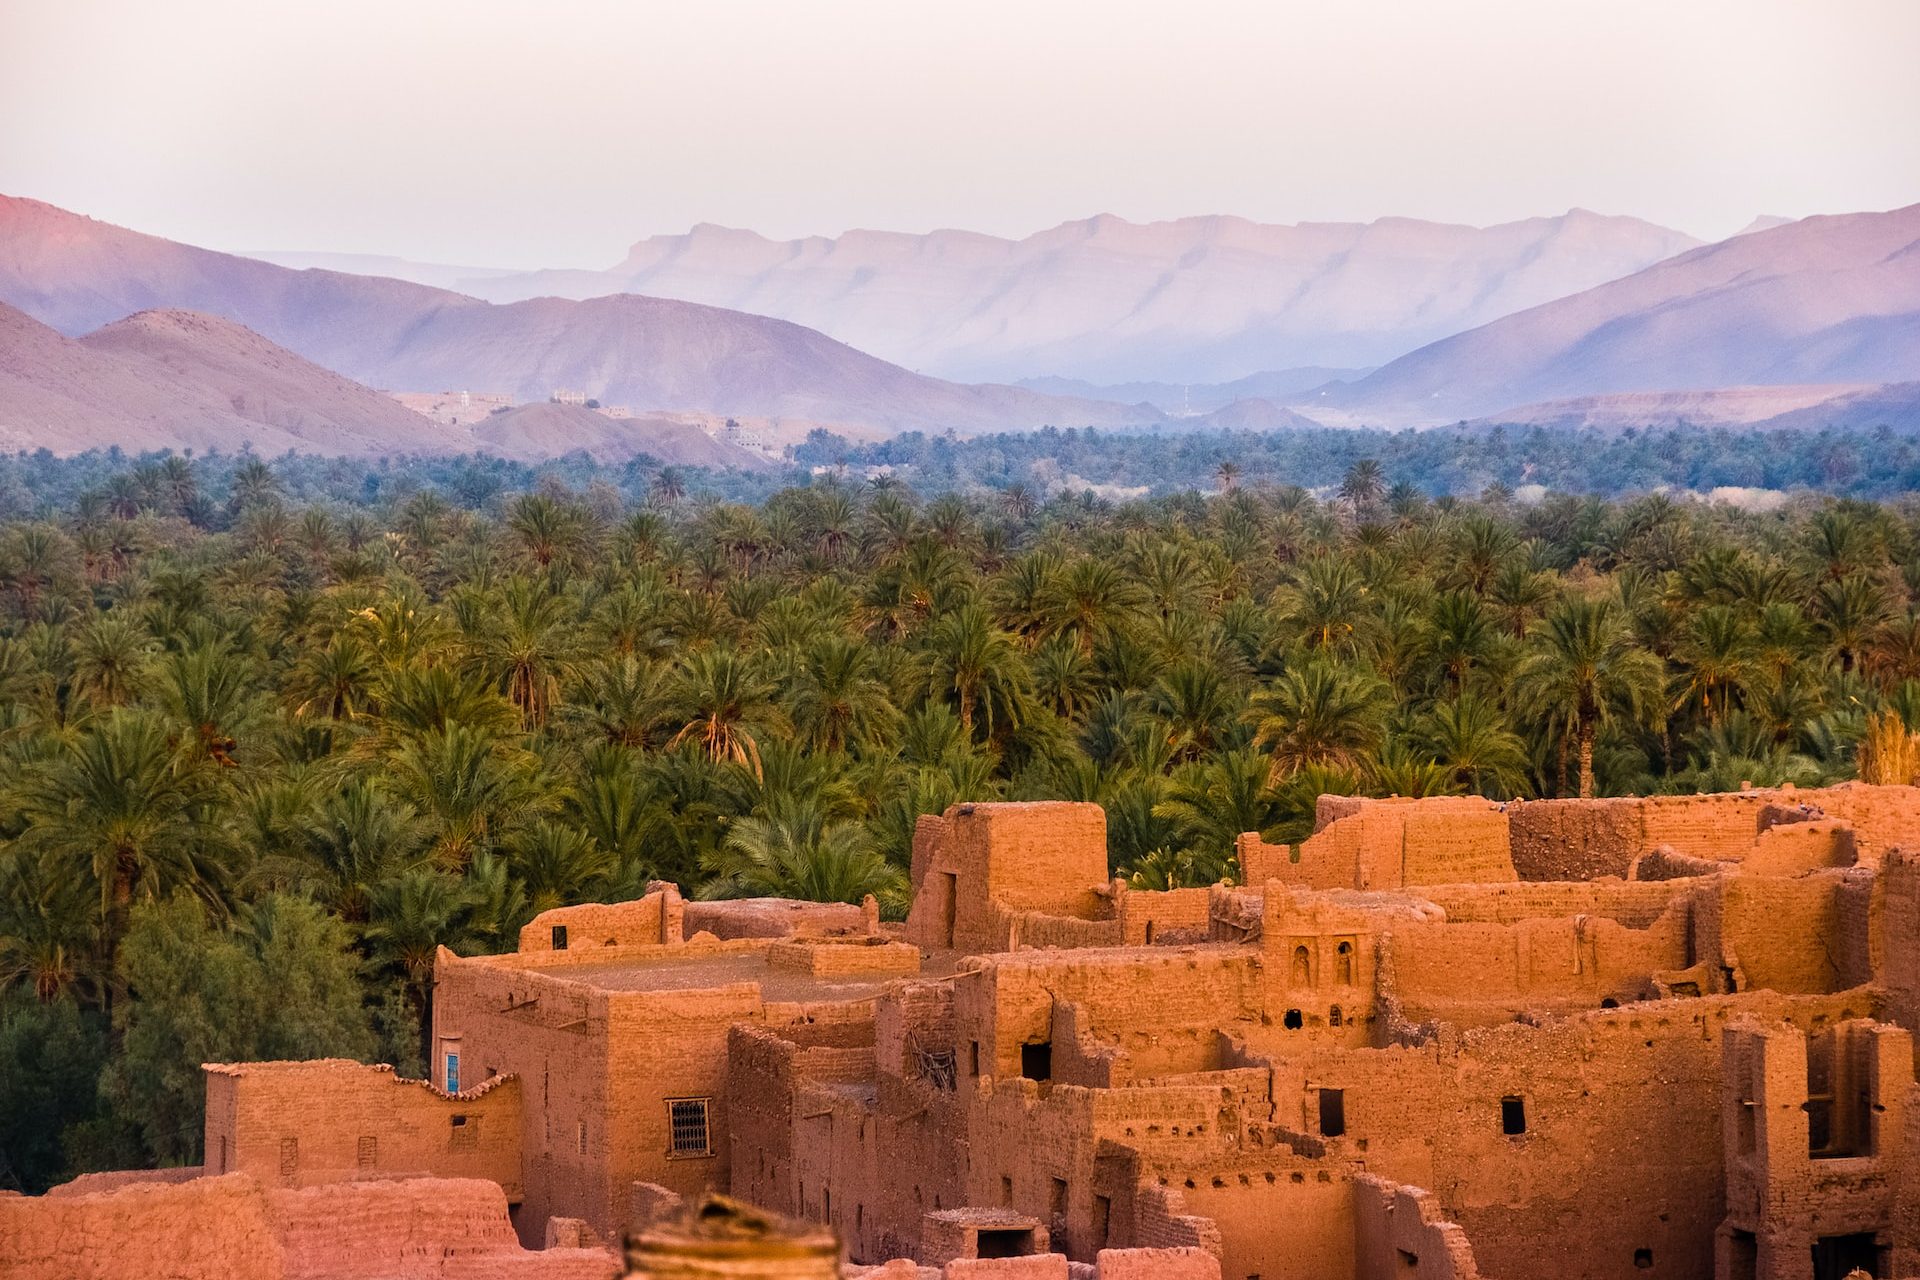 An image of the oasis in Tamnougalt, Morocco.